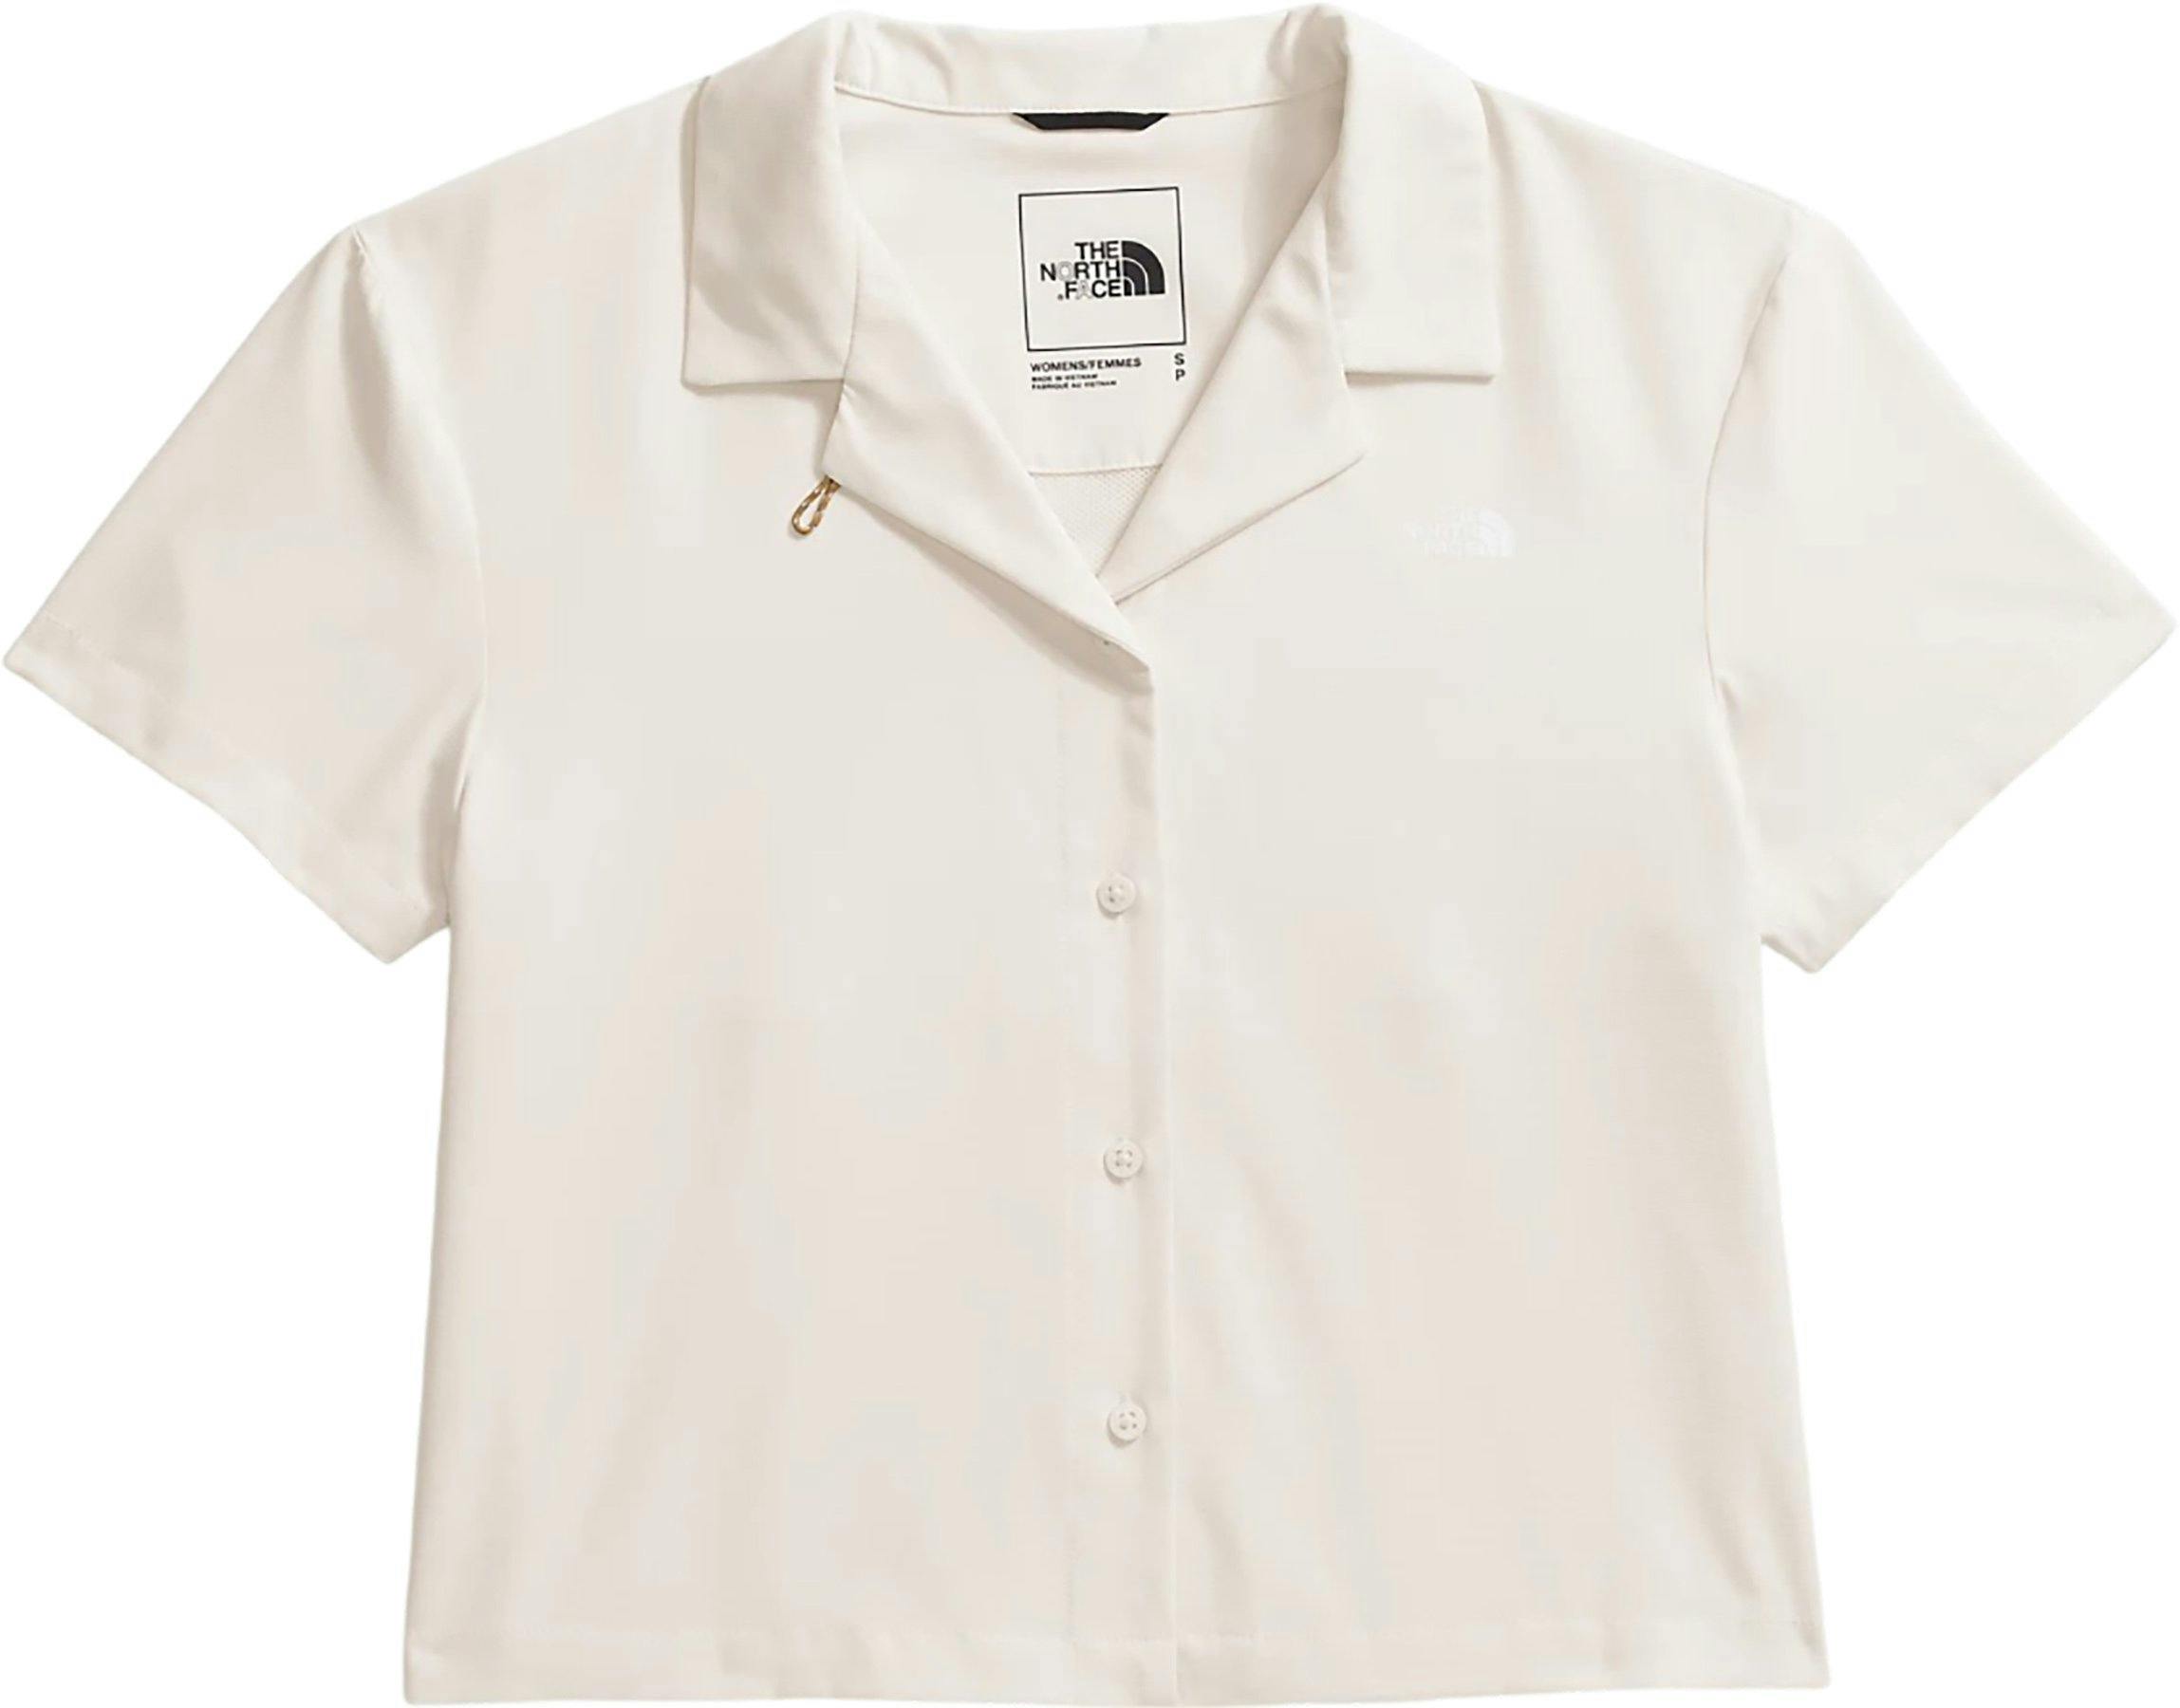 Product image for First Trail UPF Short Sleeve Shirt - Women's